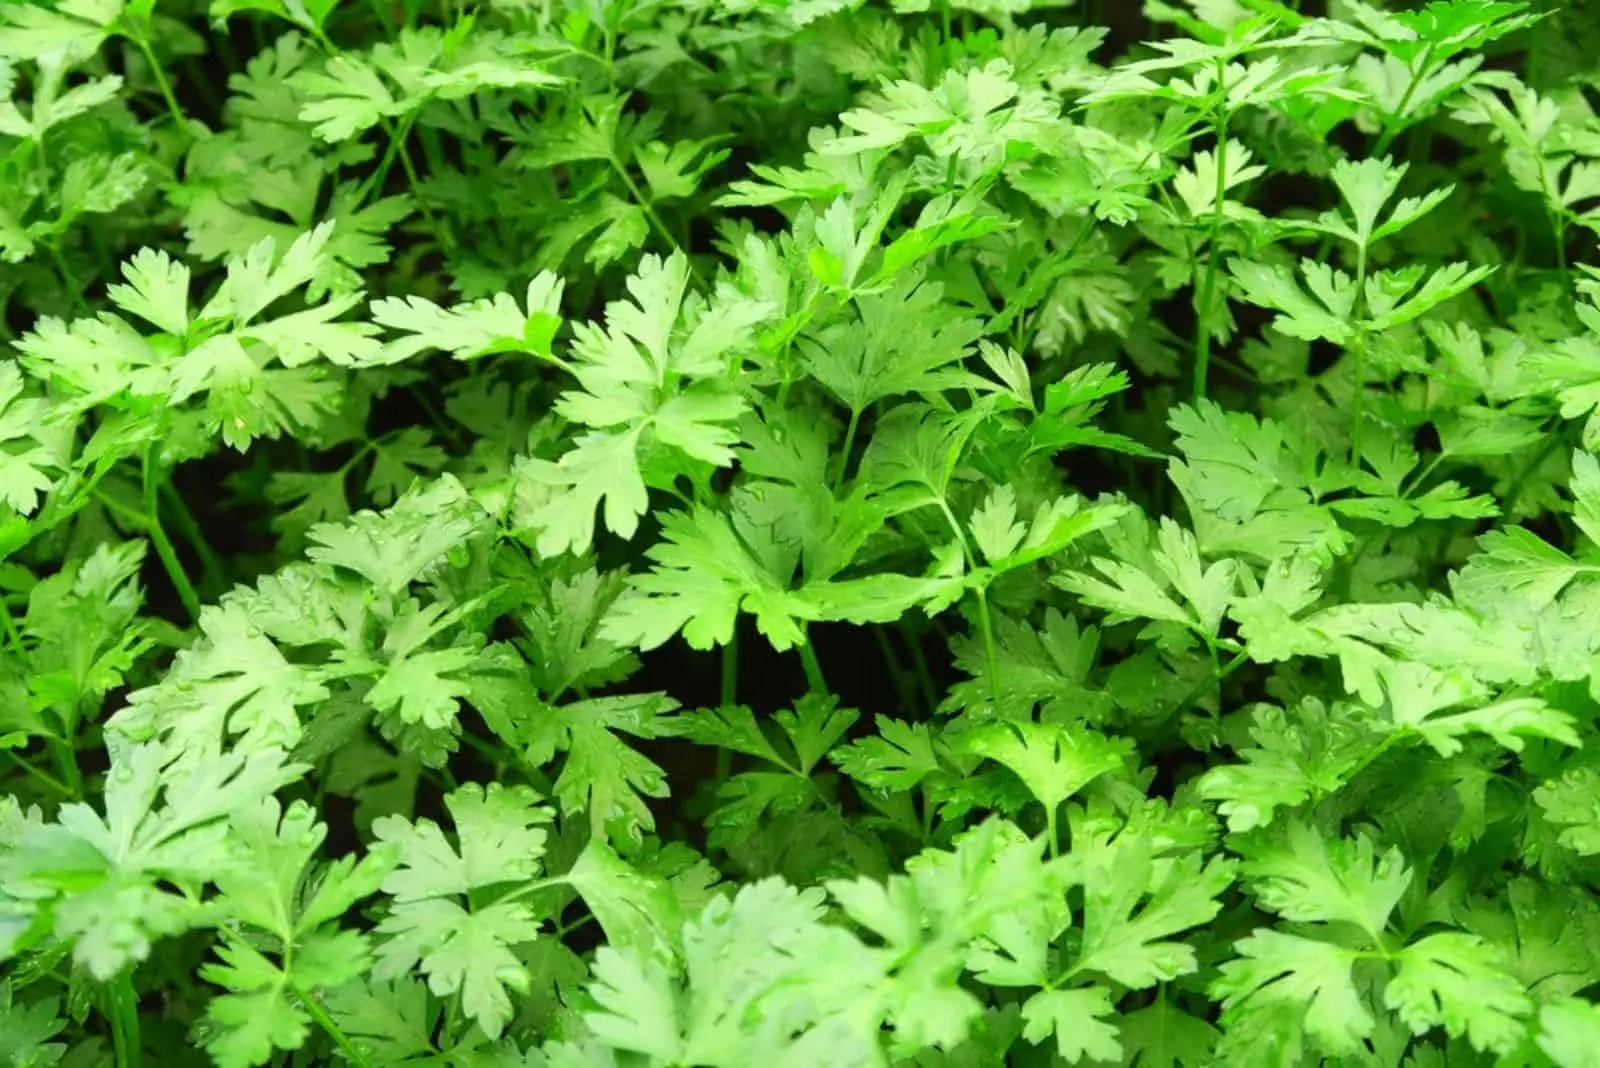 young green parsley grows on a bed